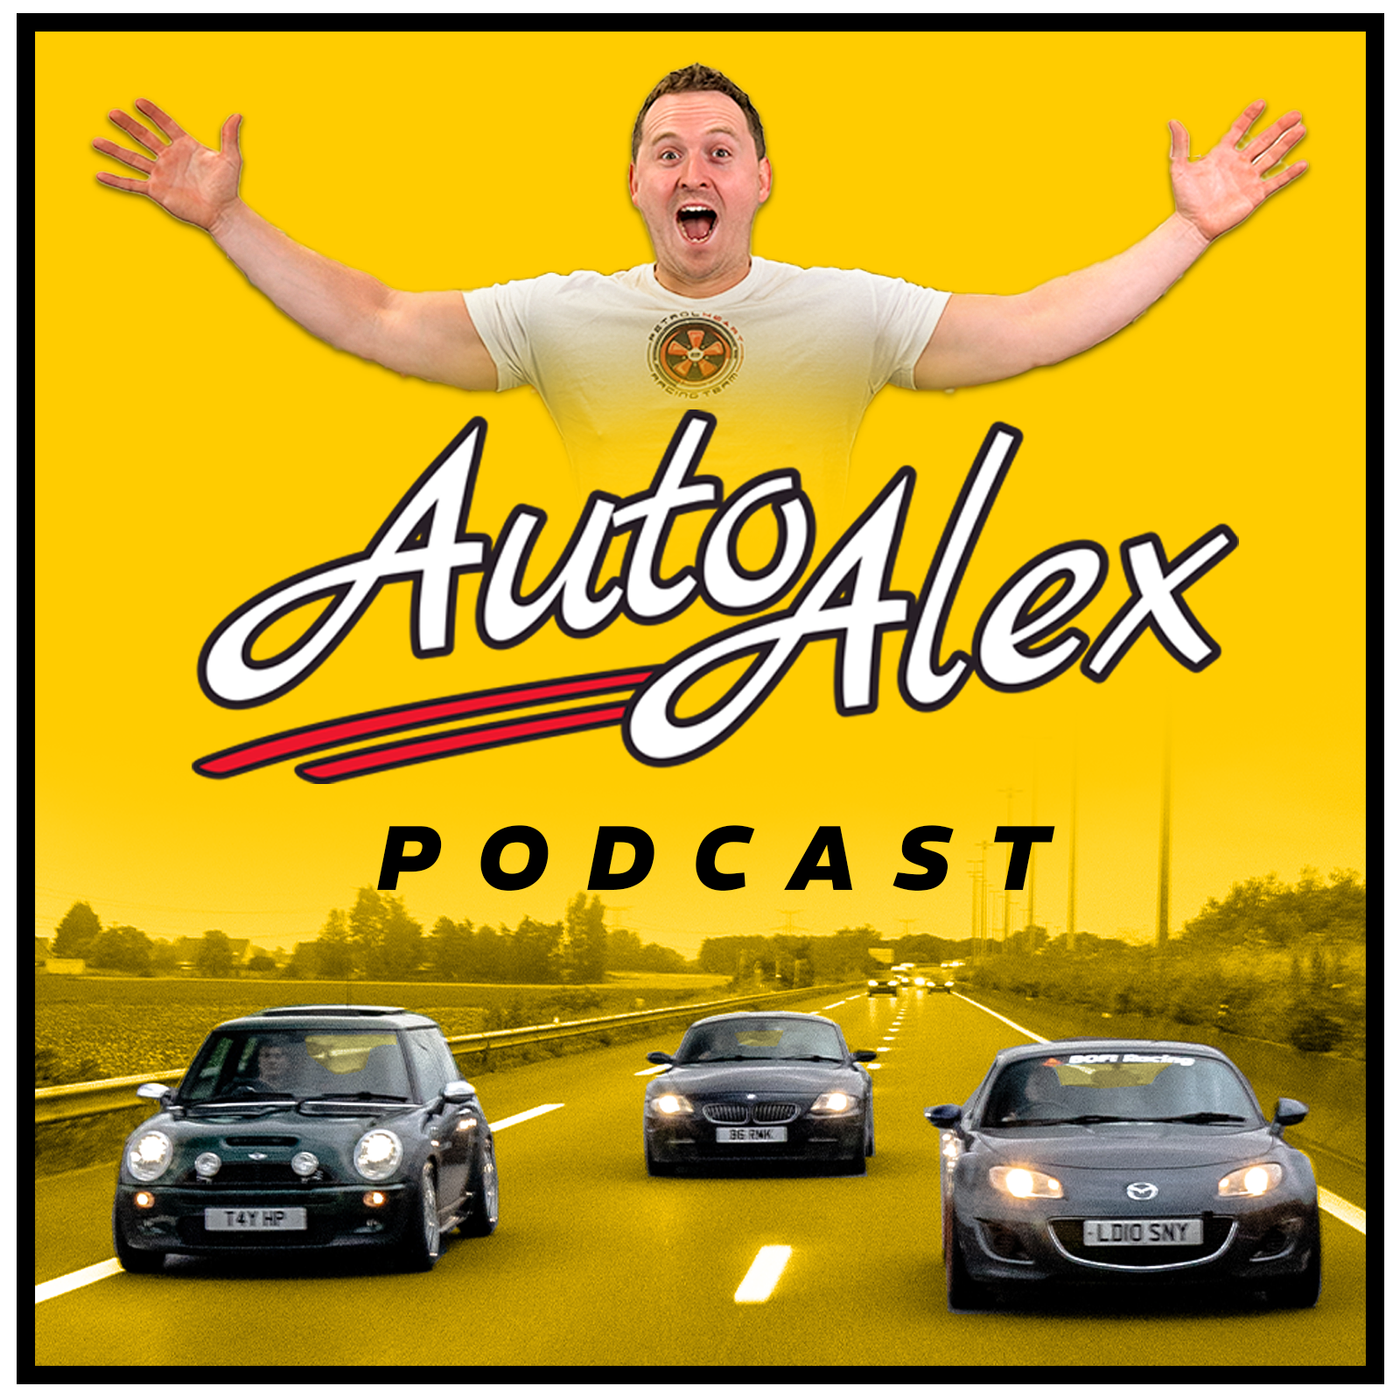 The AutoAlex Podcast / WHY I LEFT AND STARTED MY OWN YOUTUBE CHANNEL...